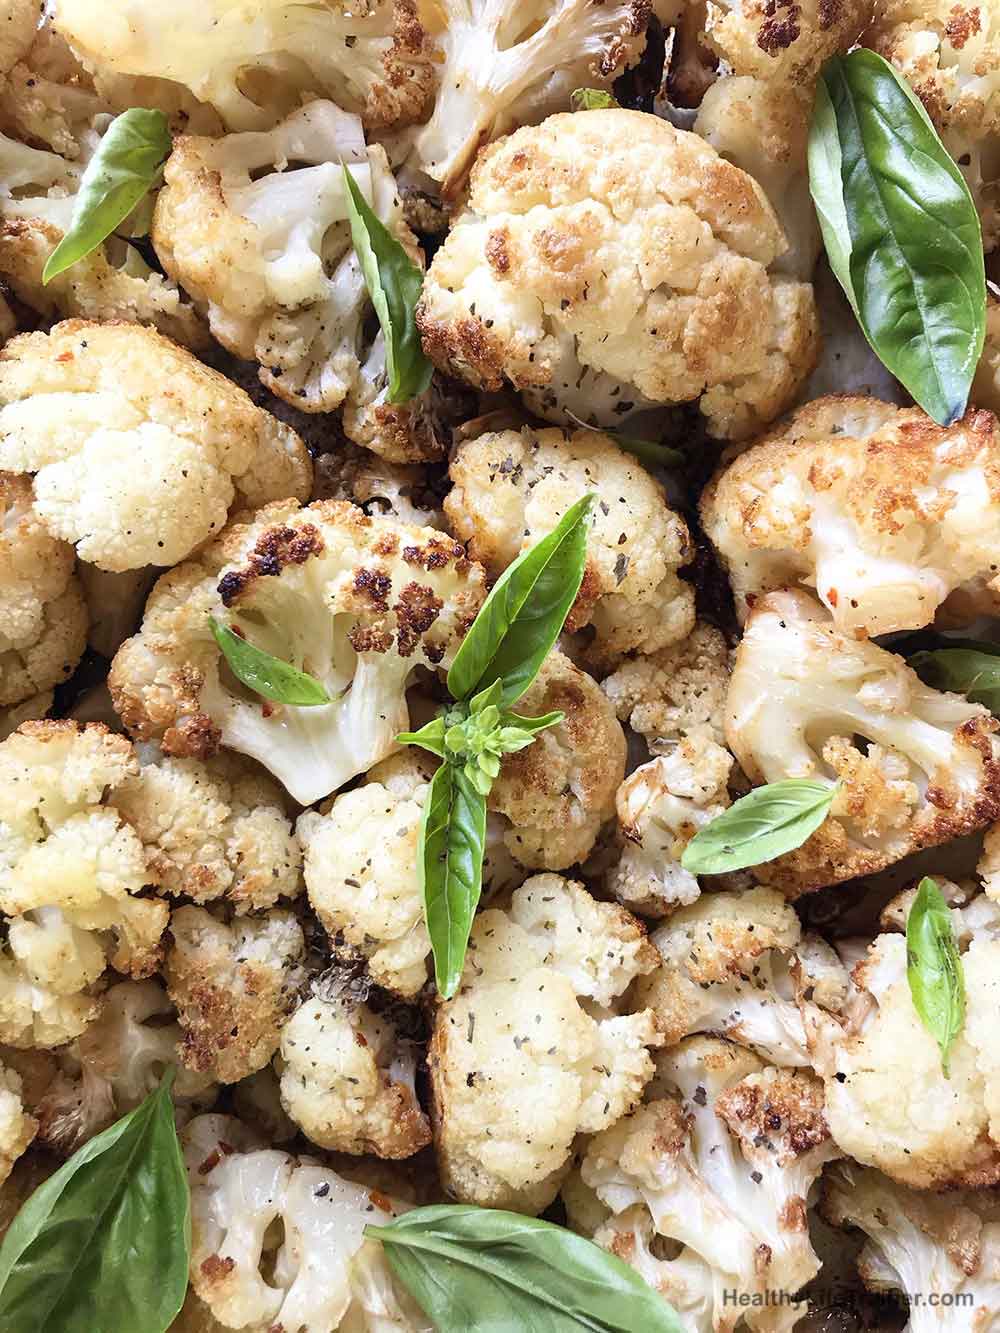 Vegan roasted cauliflower with garlic topped with fresh basil leaves.